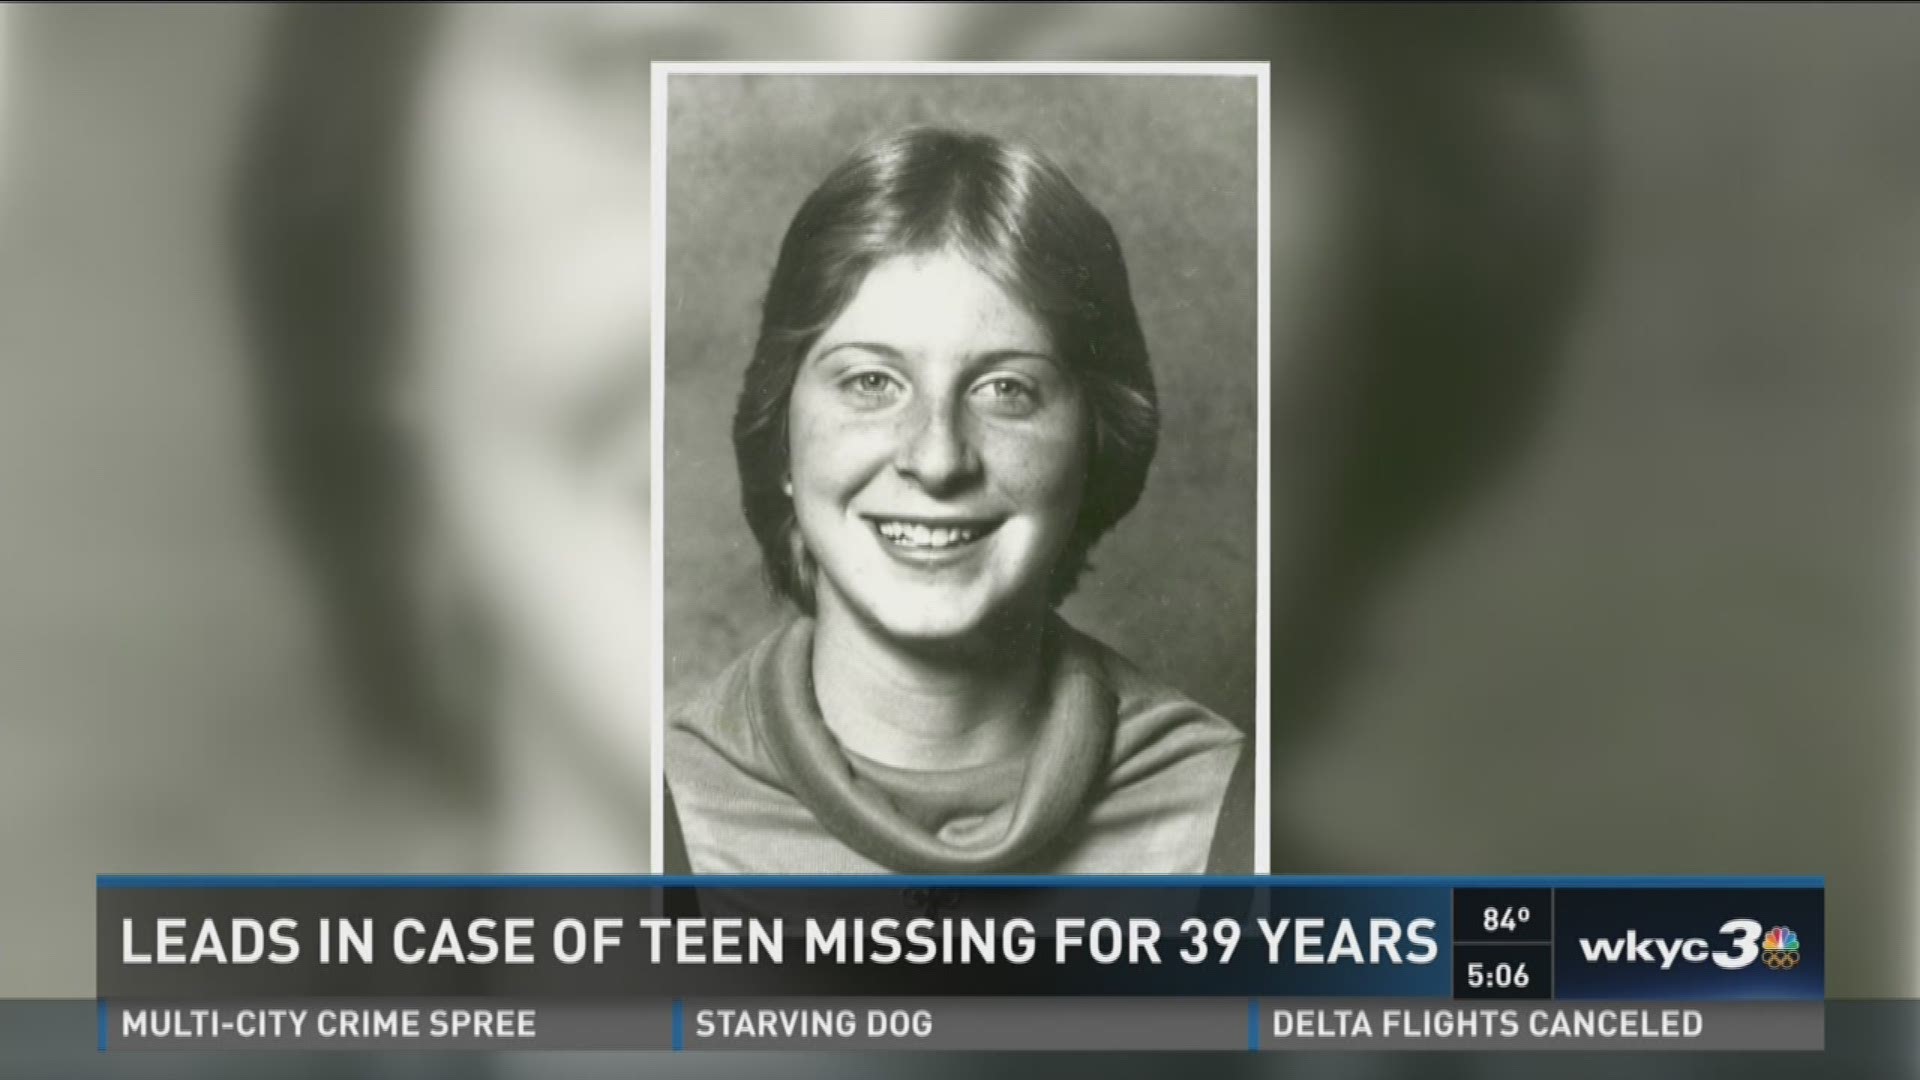 Leads in case of teen missing for 39 years